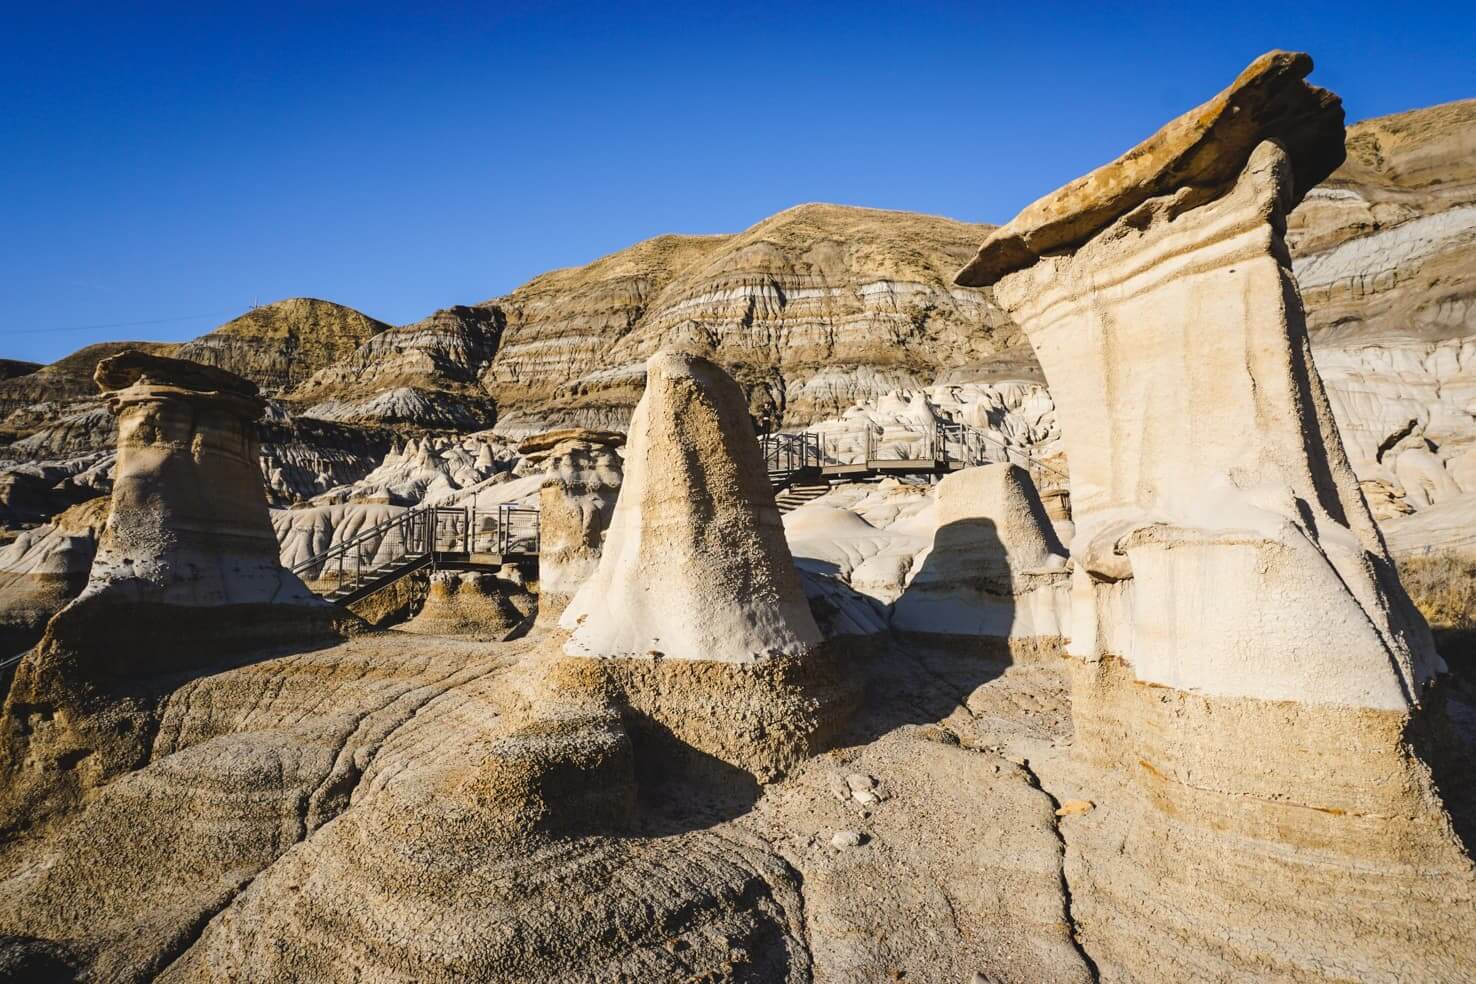 Things to do in Drumheller